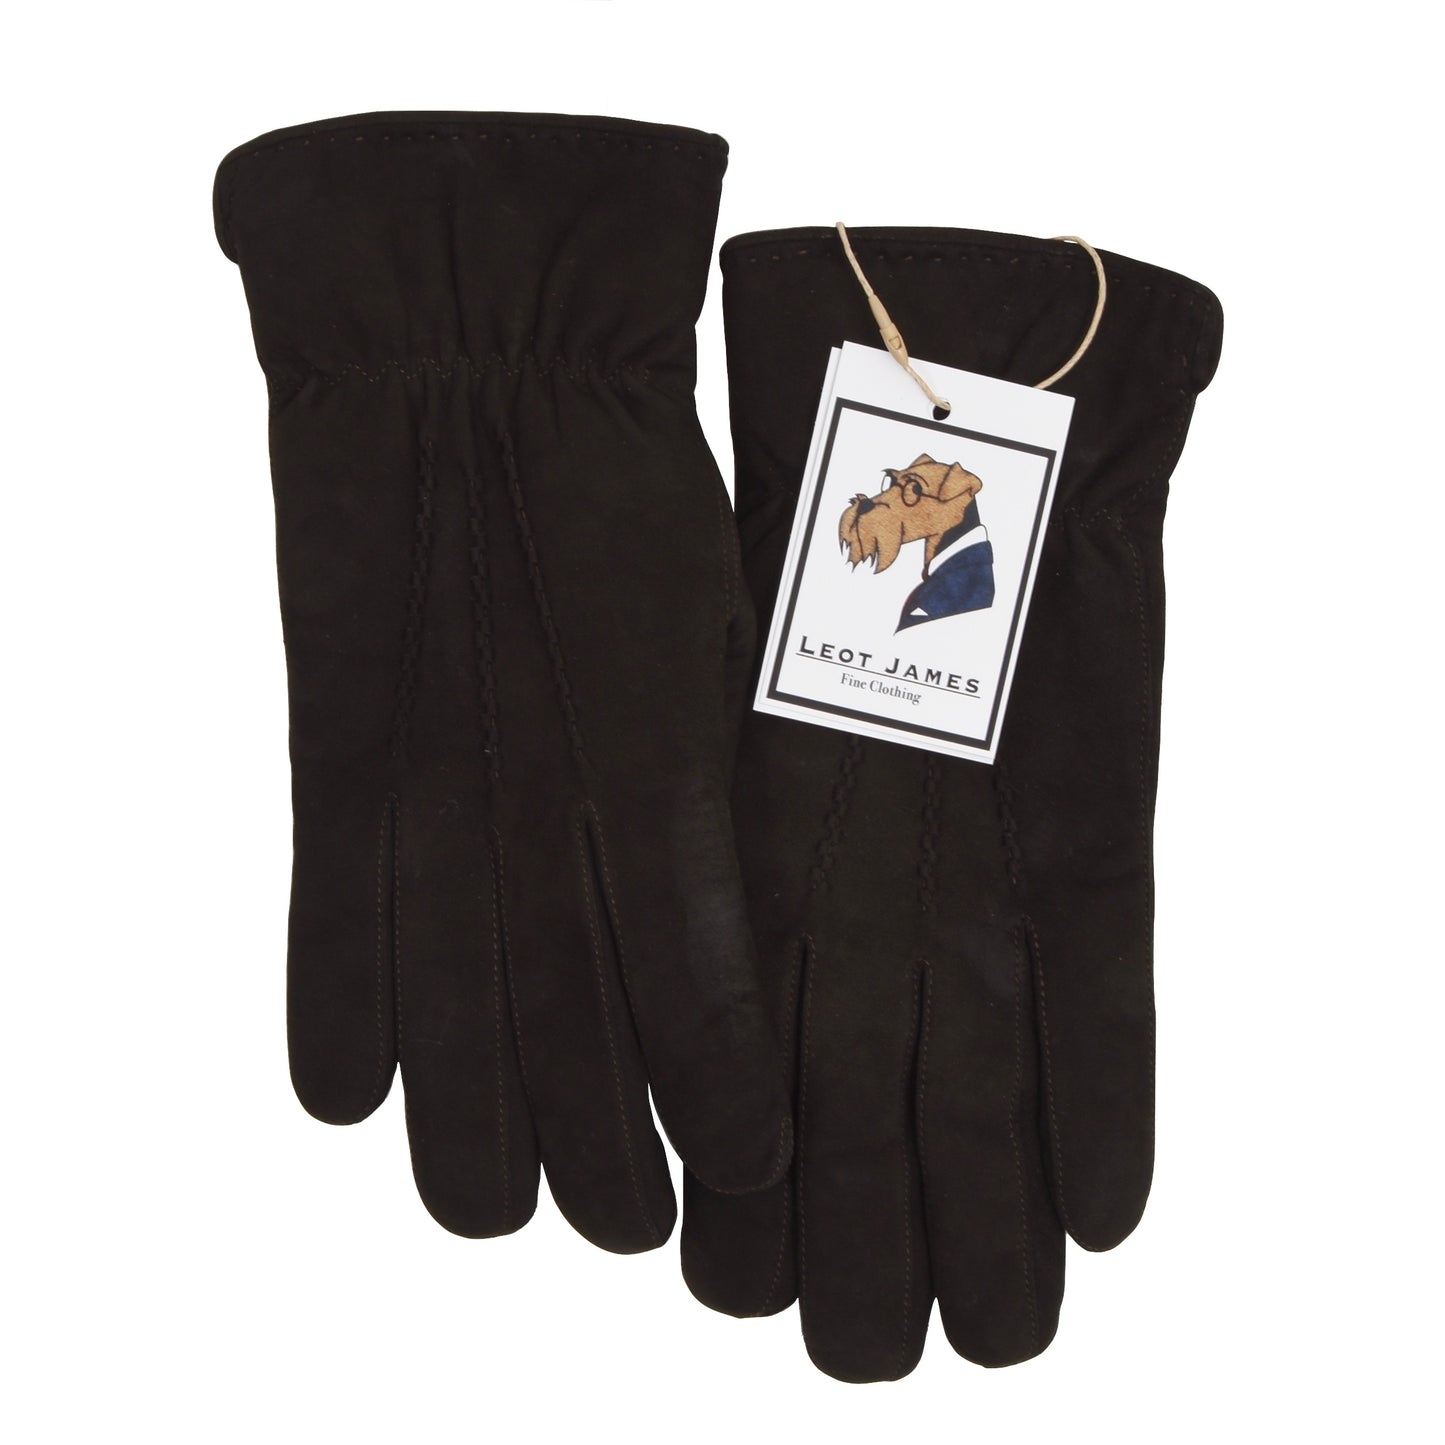 RIKA Wien Curly Shearling Gloves Size 8.5 - Chocolate Brown